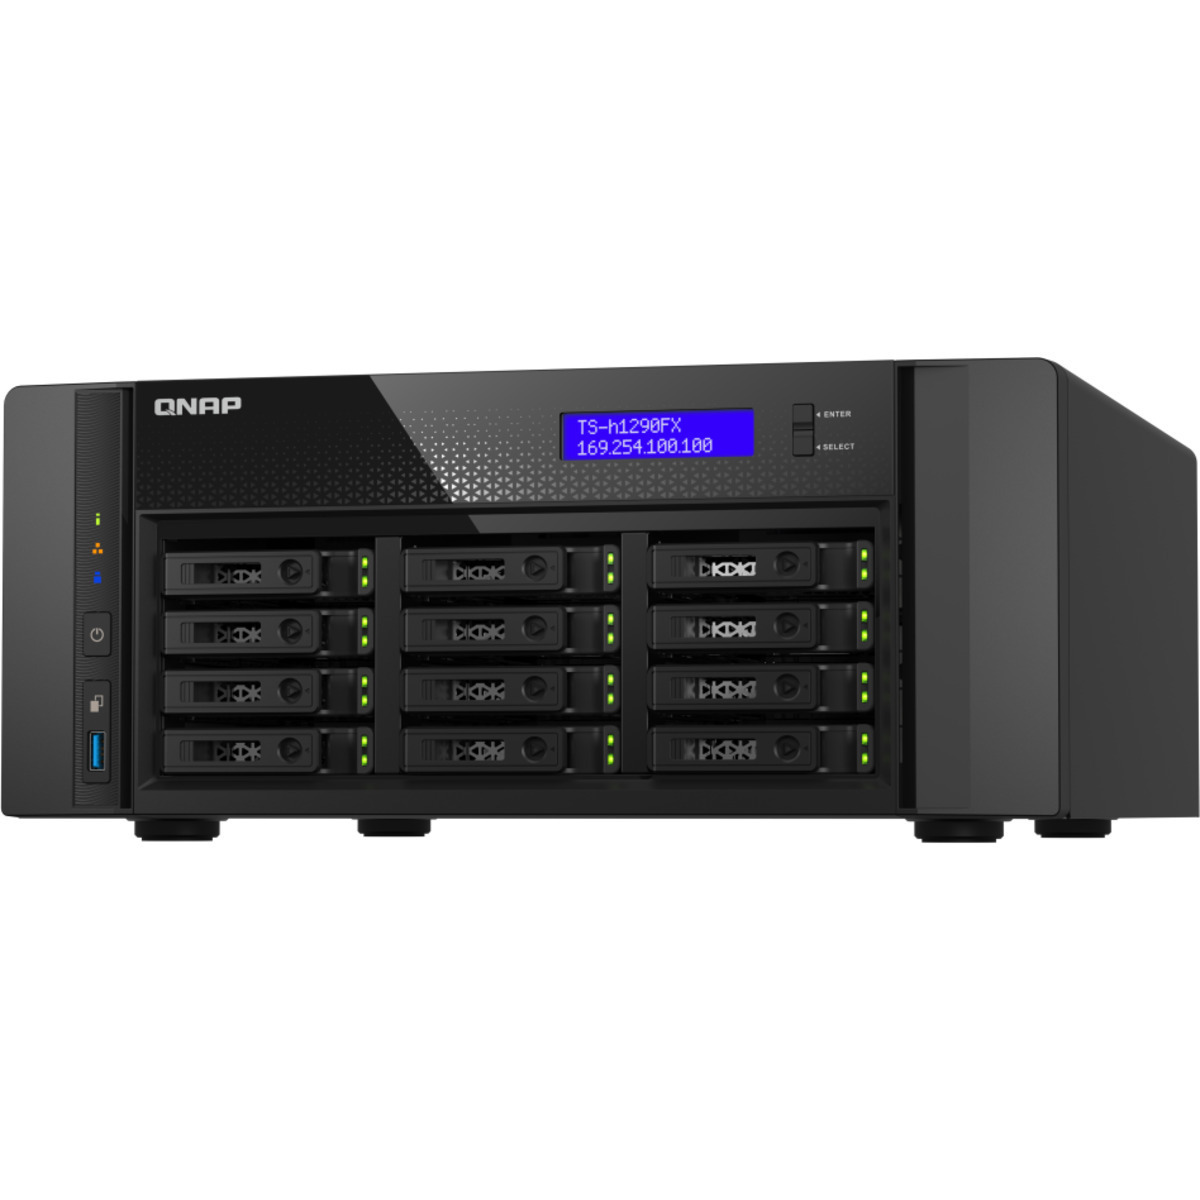 QNAP TS-h1290FX QuTS 7232P hero Edition 11tb 12-Bay Desktop Large Business / Enterprise NAS - Network Attached Storage Device 11x1tb Crucial MX500 CT1000MX500SSD1 2.5 560/510MB/s SATA 6Gb/s SSD CONSUMER Class Drives Installed - Burn-In Tested TS-h1290FX QuTS 7232P hero Edition